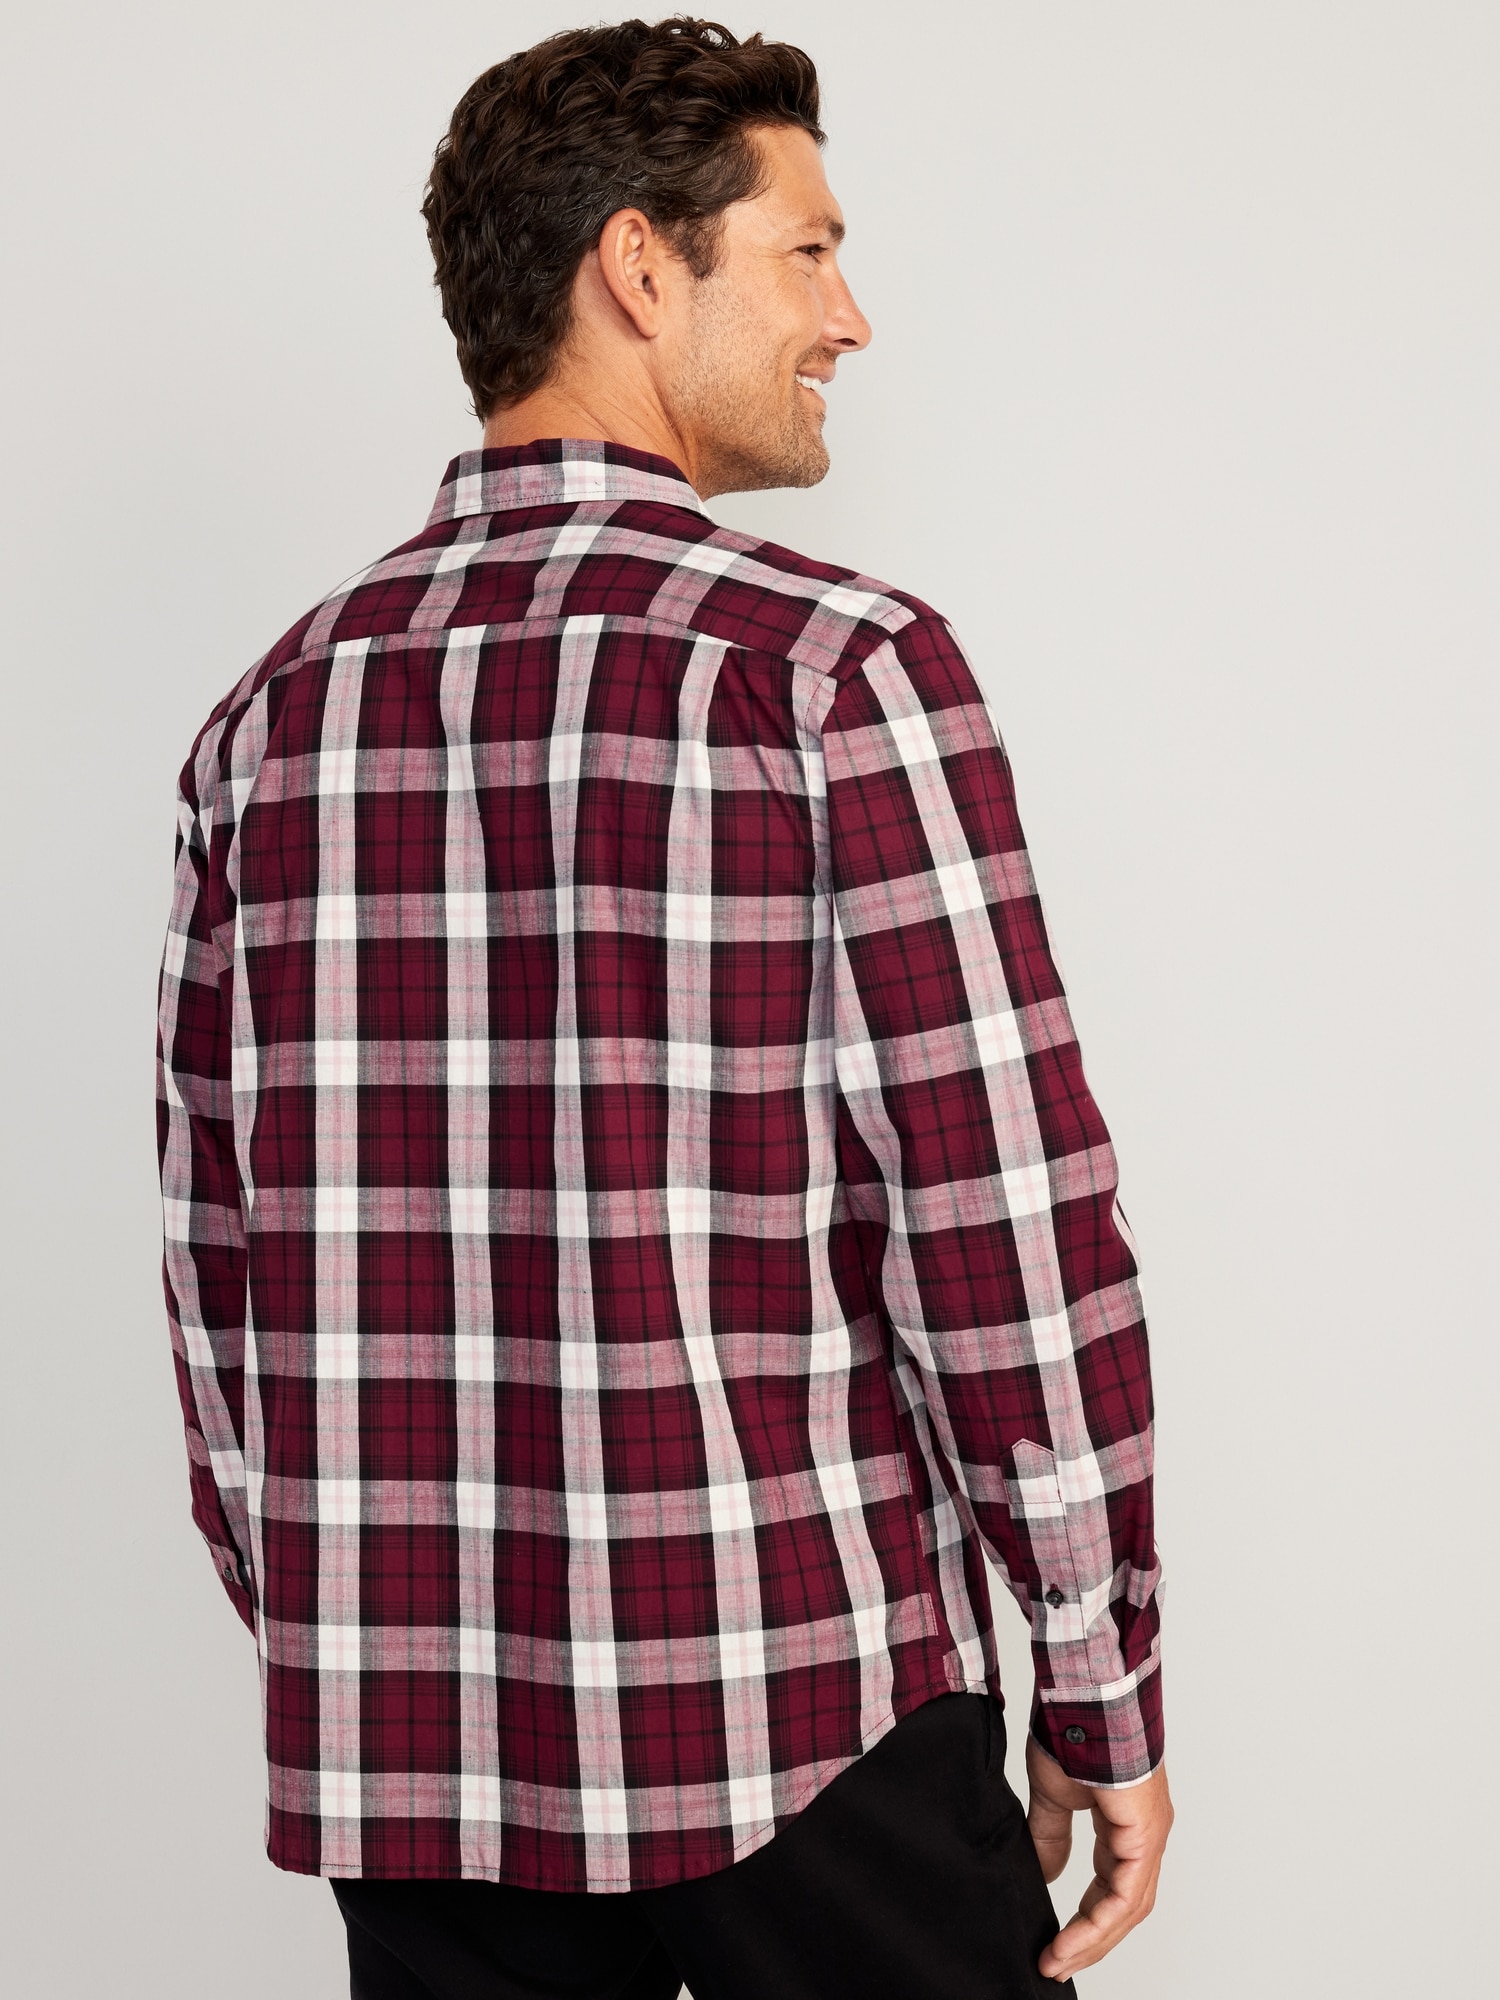 Classic-Fit Everyday Shirt for Men | Old Navy